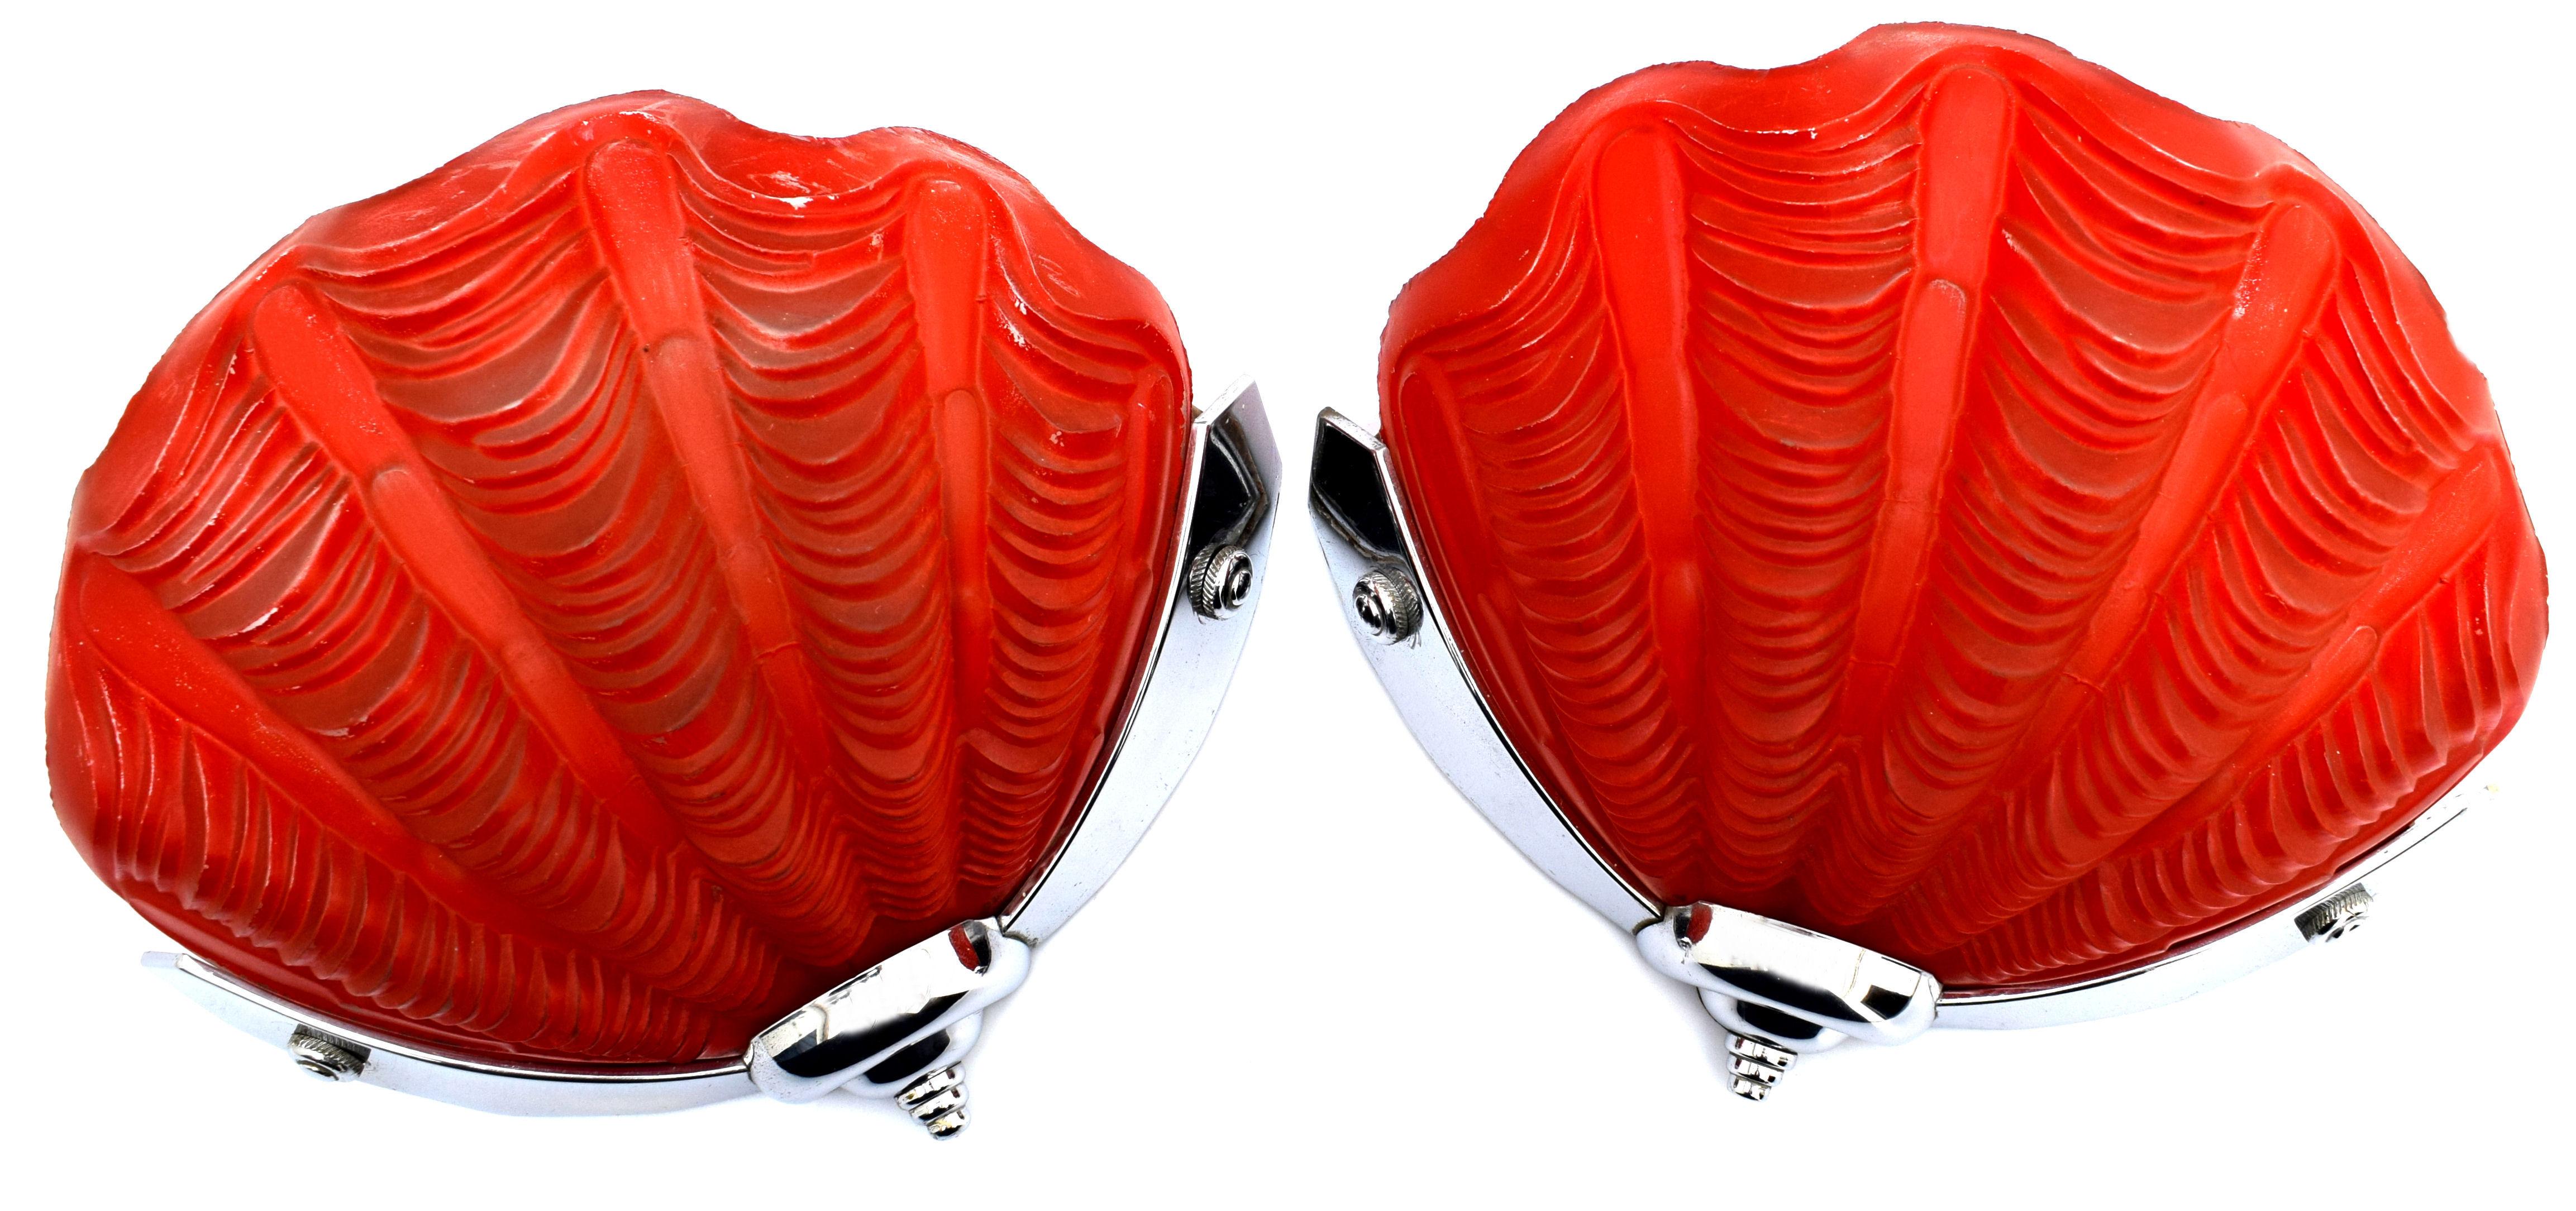 A beautiful matching set of Art Deco wall light sconces in the shape of shells in a rare and unusual colour of tomato red. The color of the glass doesn't actually change the colour of the light omitted you would need to have a red bulb for that but